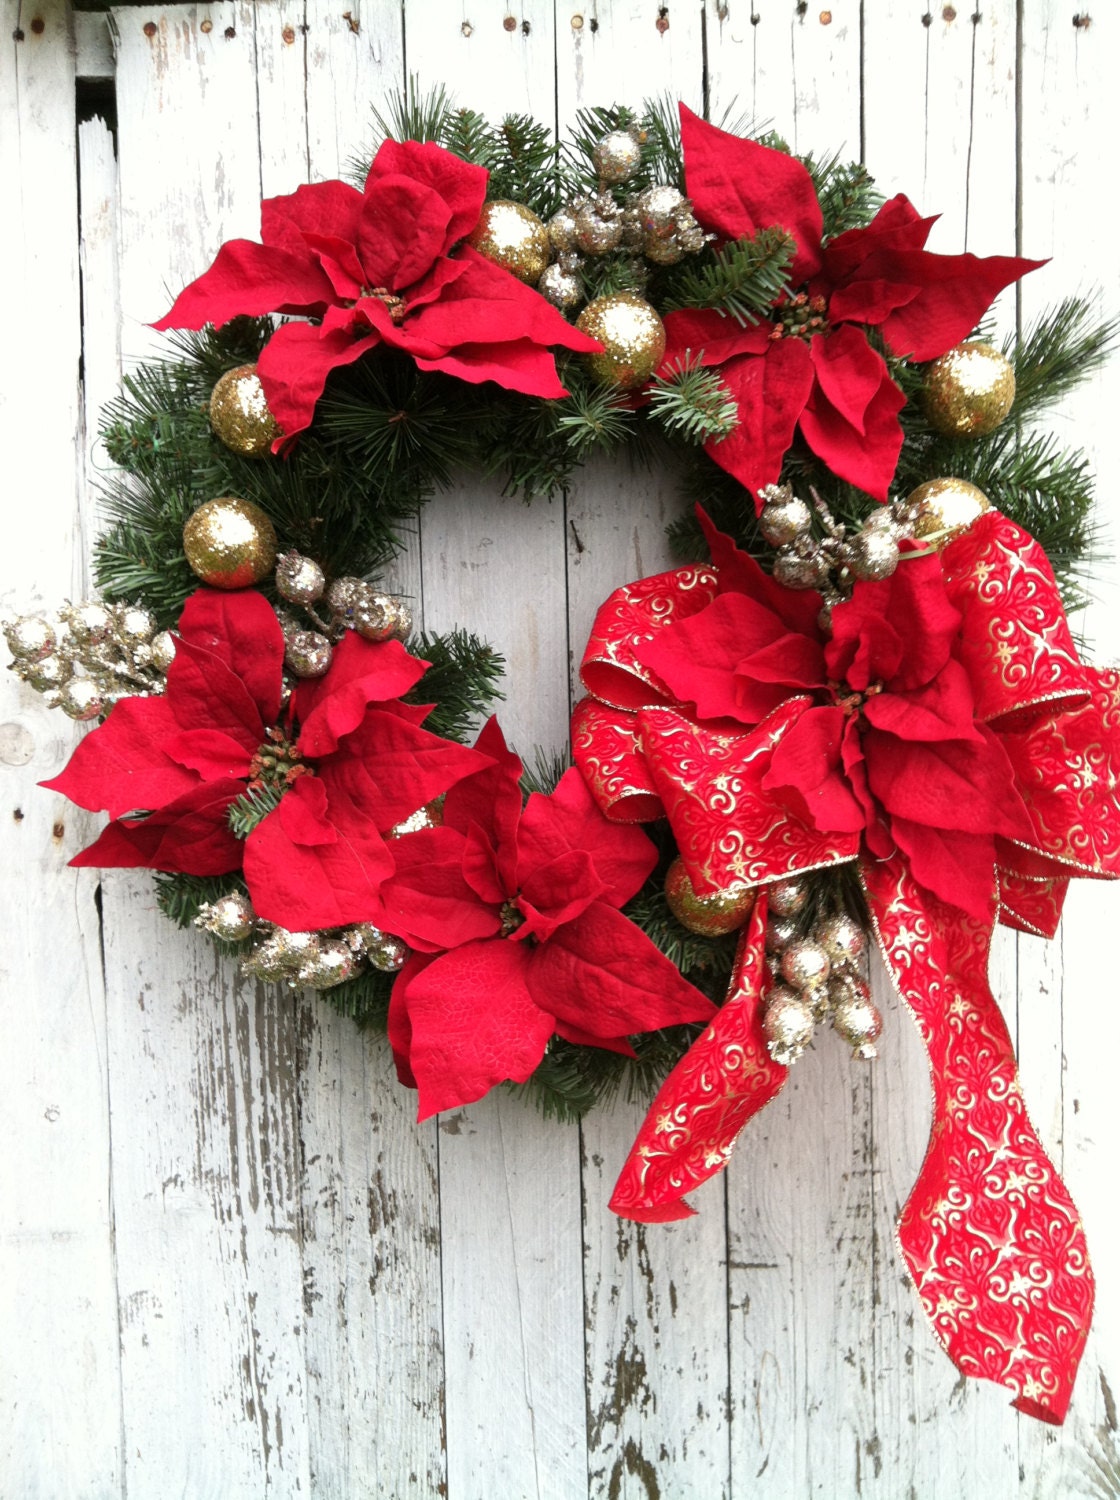 Christmas Wreath for Door, Red and Gold Poinsettia Wreath for Christmas, Holiday Door Wreath